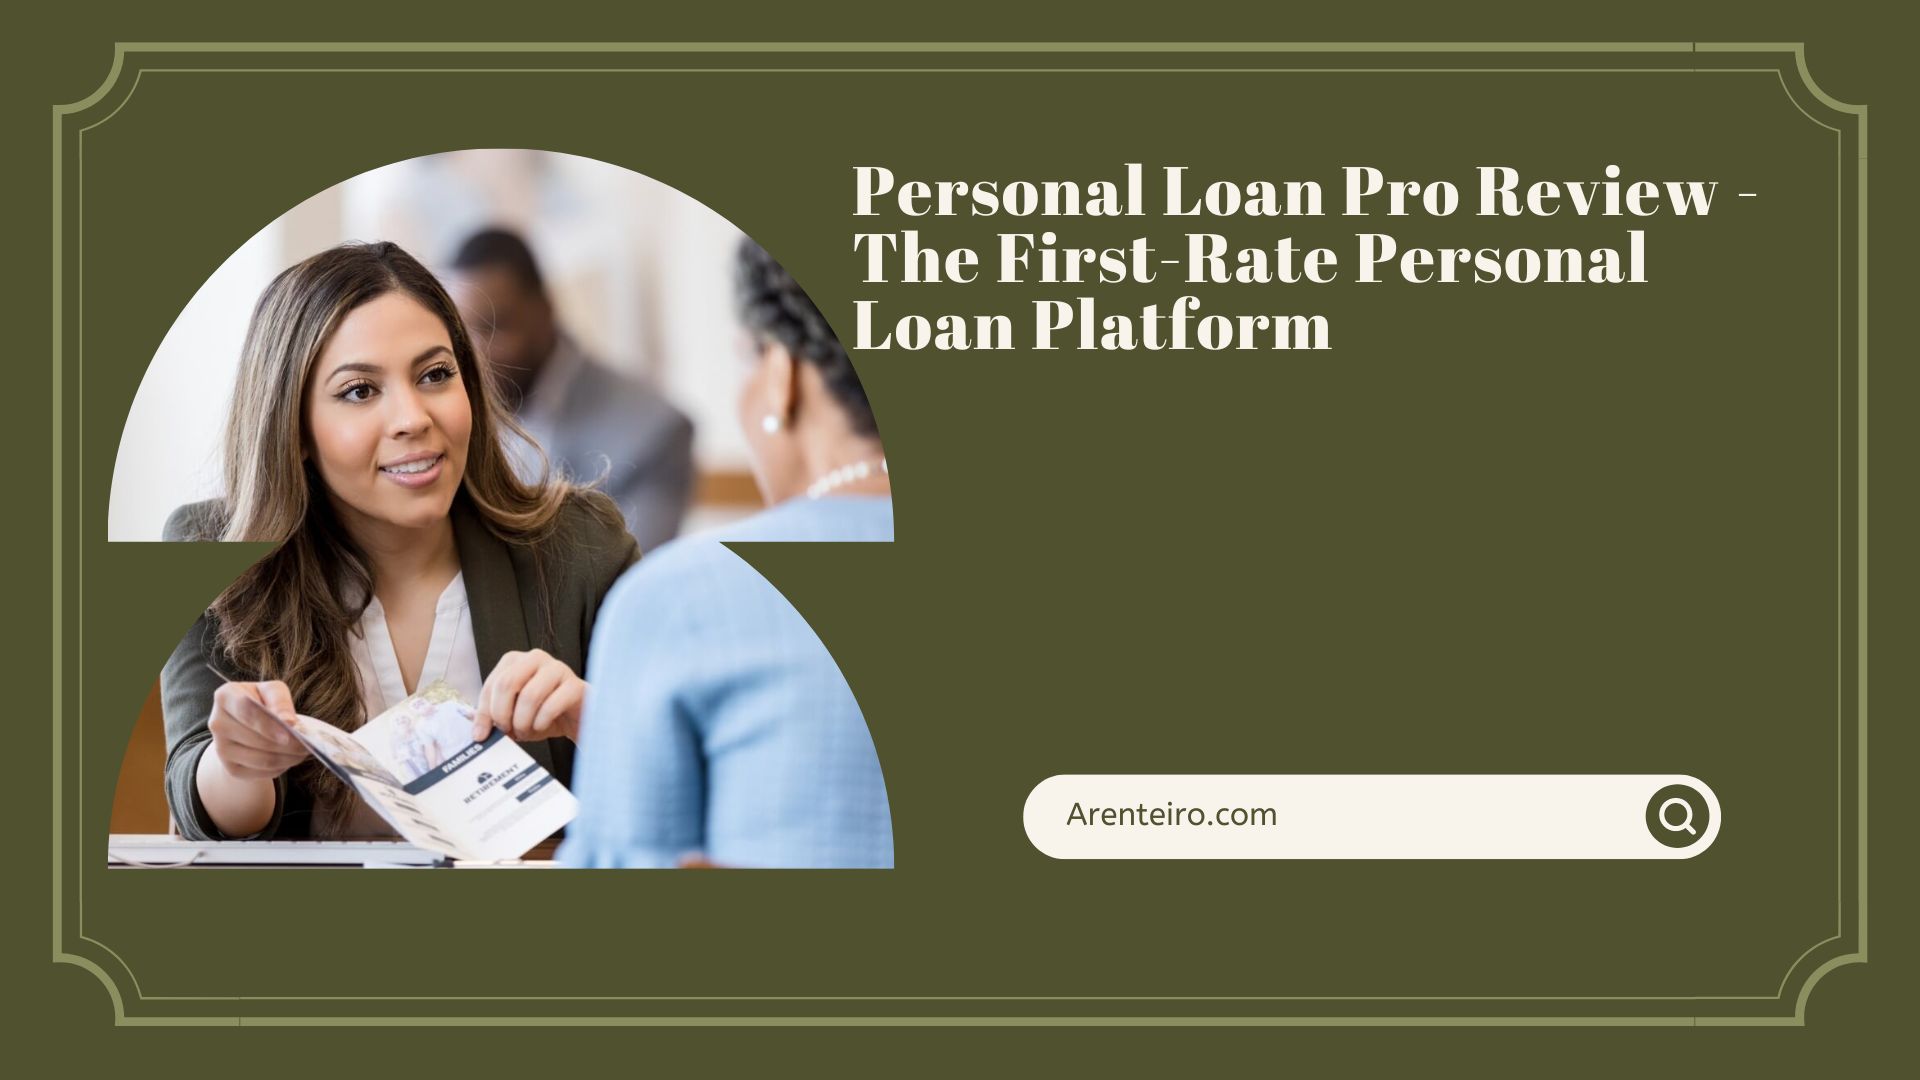 Personal Loan Pro Review - The First-Rate Personal Loan Platform